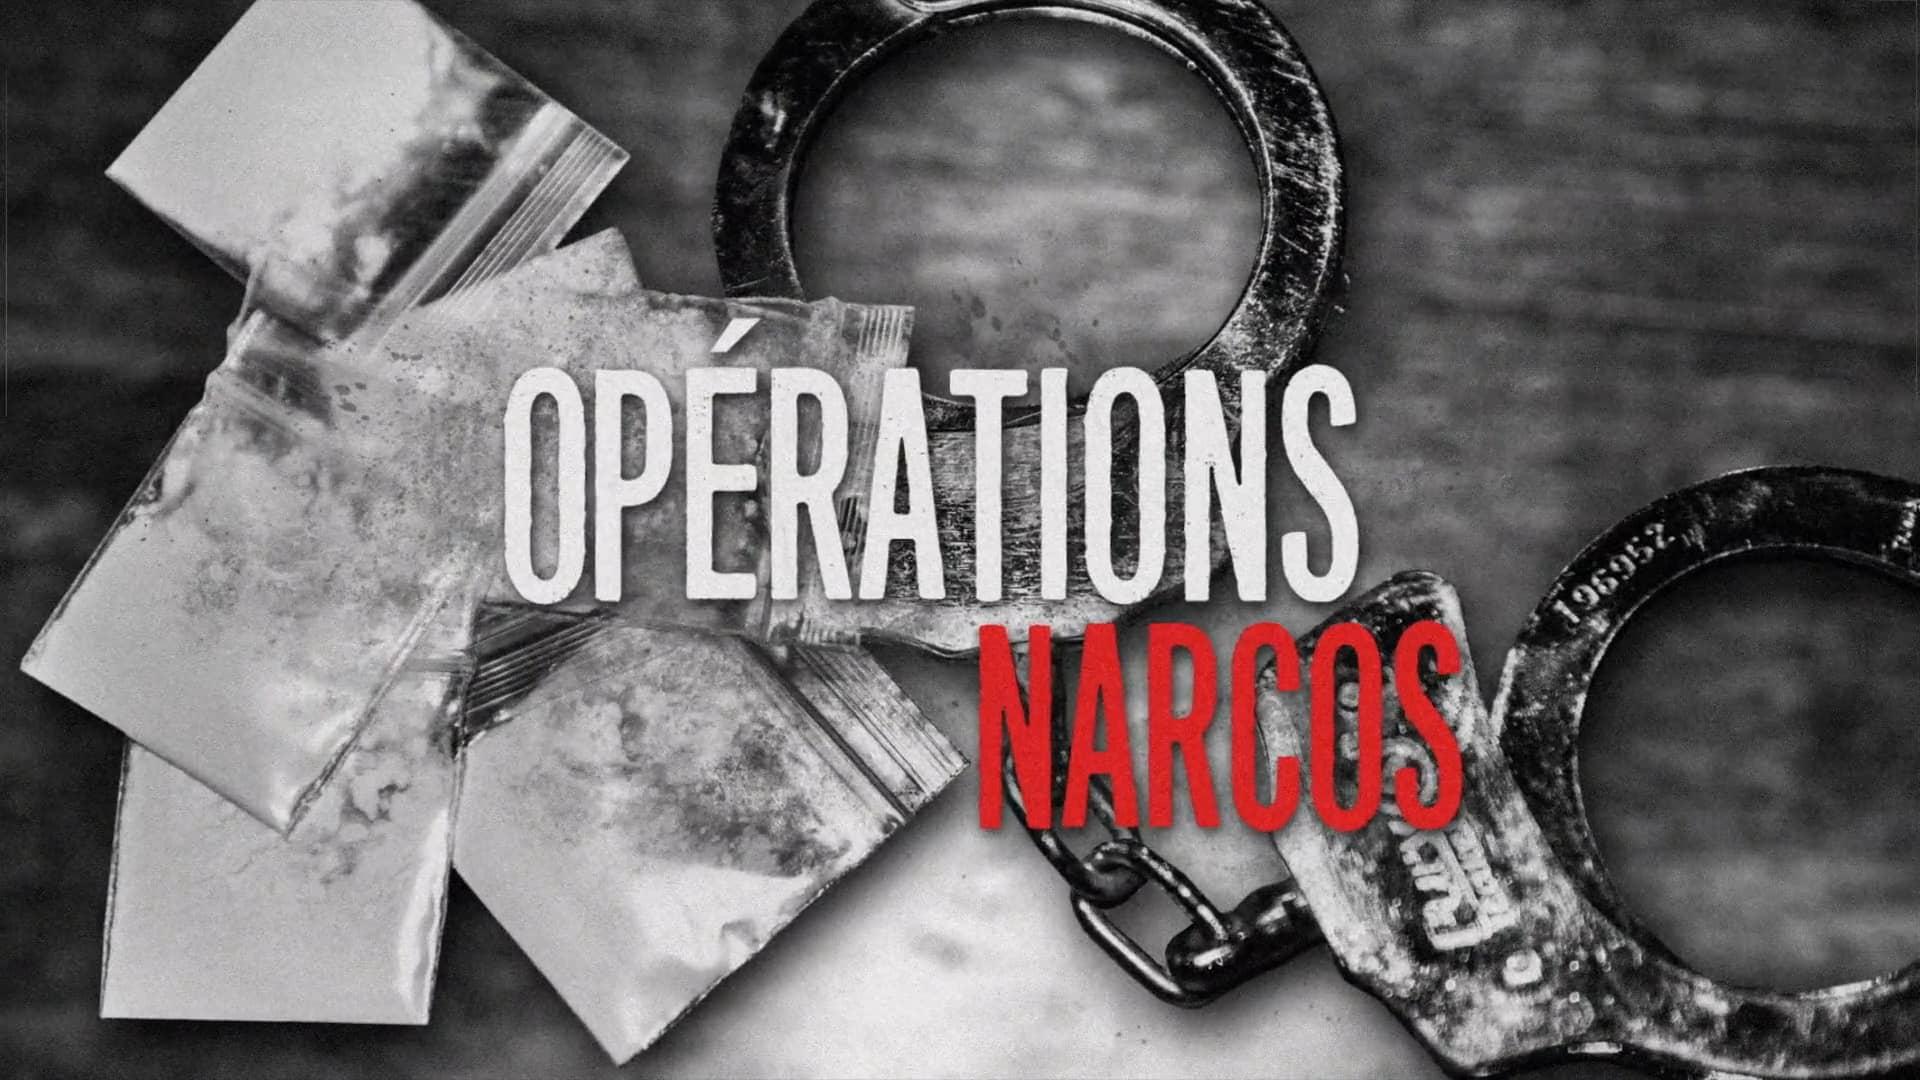 Operations Narcos